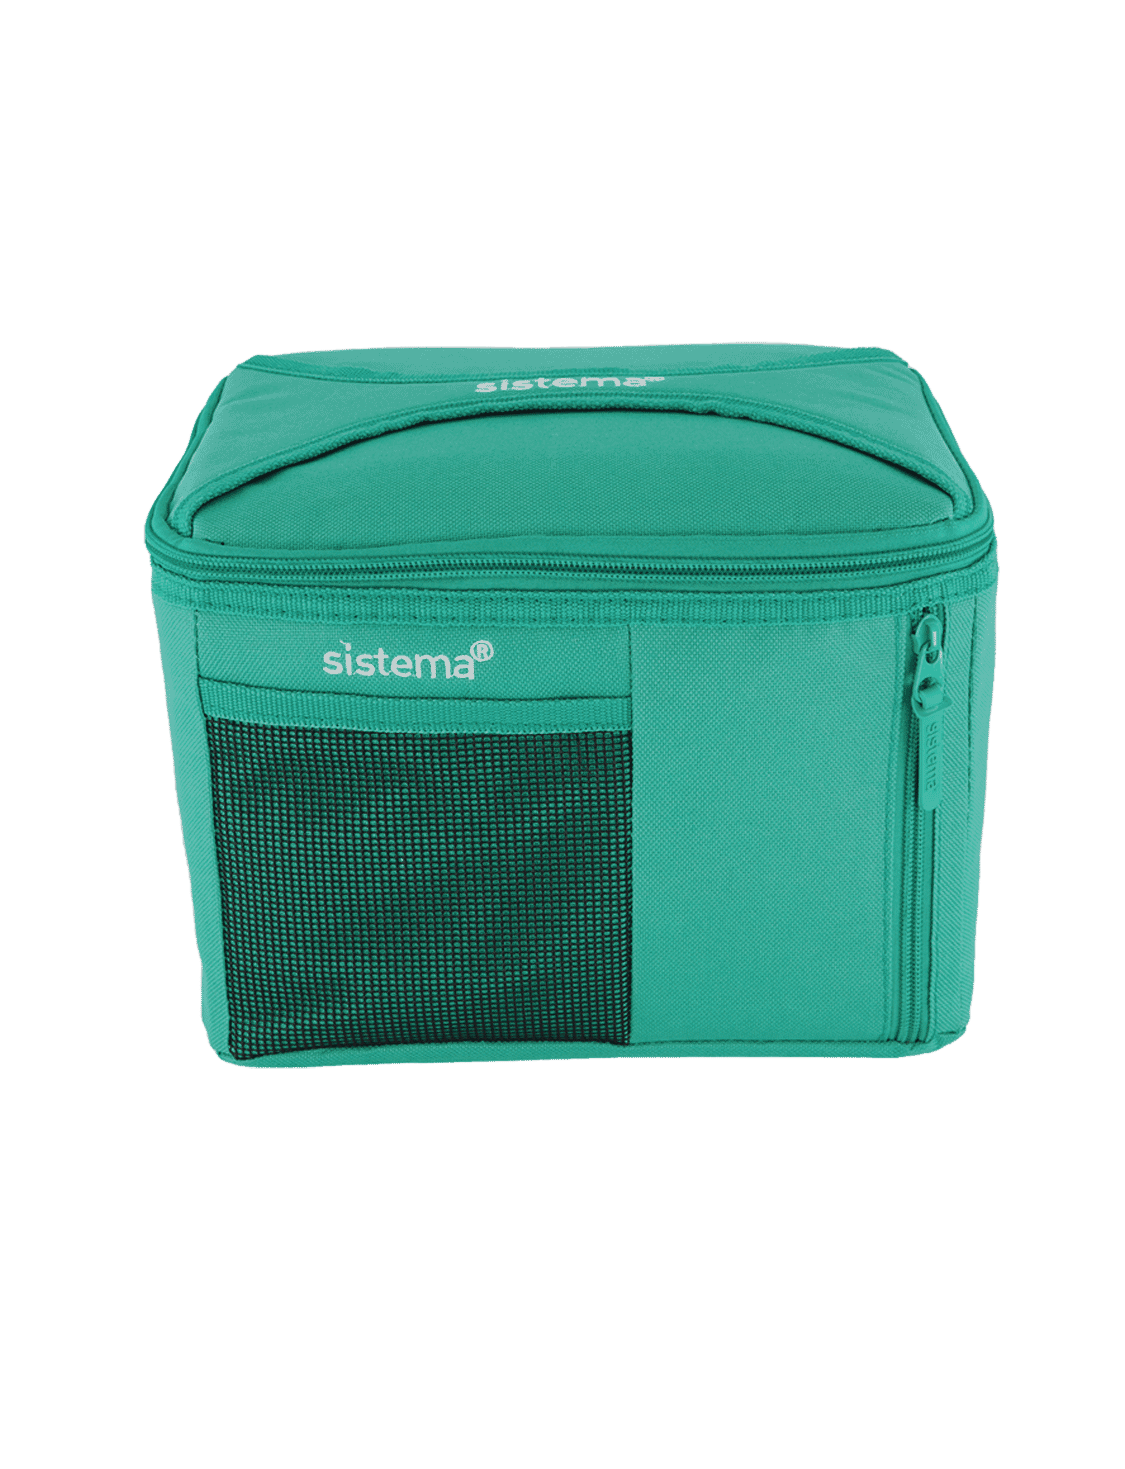 OlarHike 30 Liter Large Cooler Lunch Bag, Collapsible and Insulated Lu–